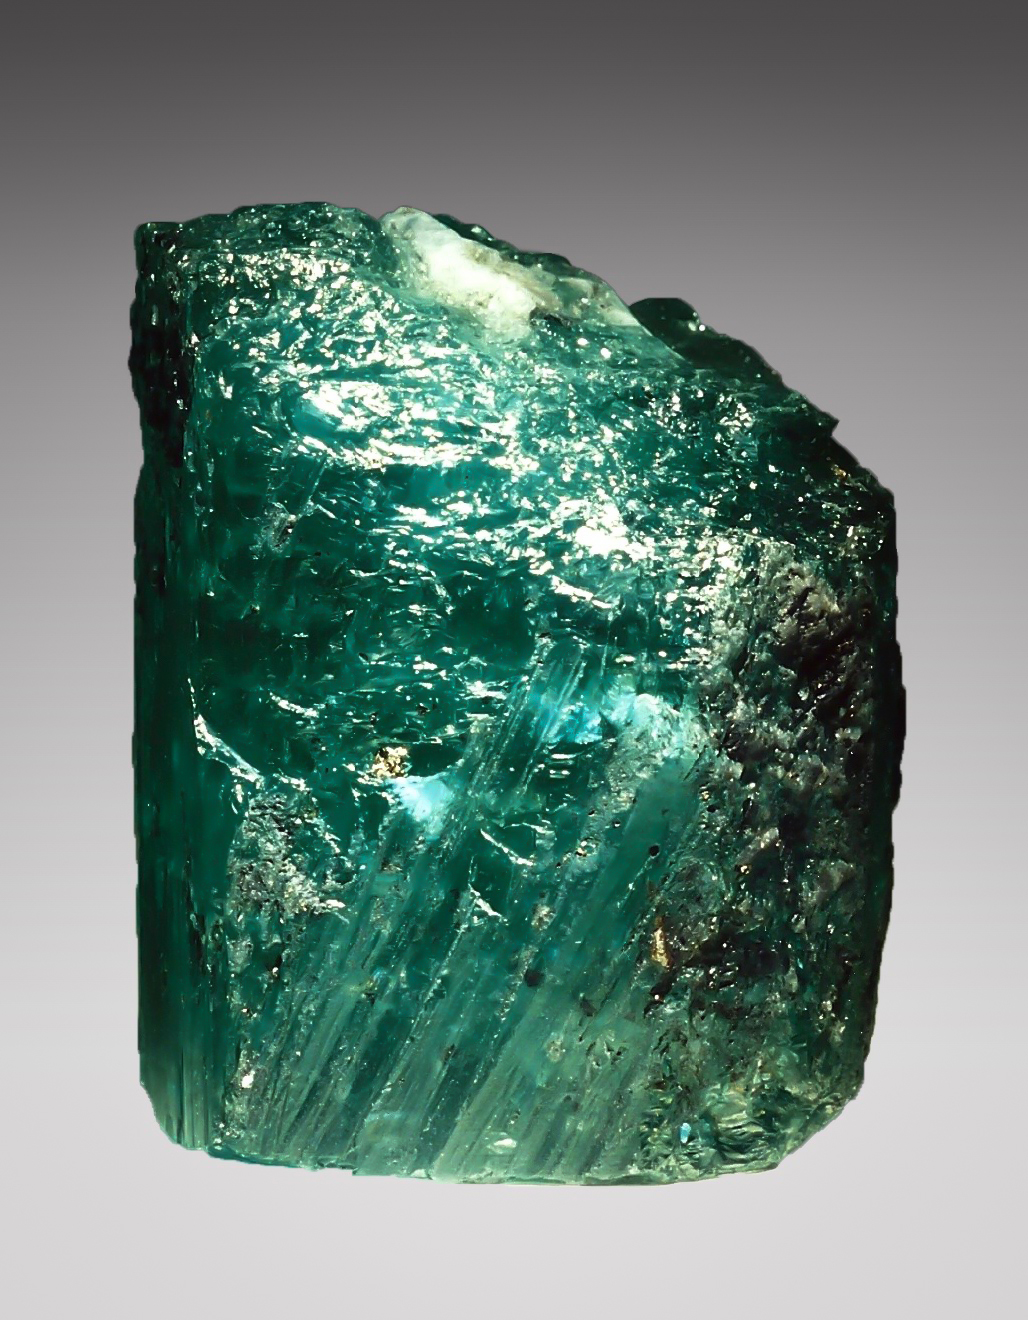  The Emerald crystal originally weighing 2,010 carats, mined in the renowned Colombian Muzo Region is one of the largest fine-gem Emerald crystals ever found in the world.    